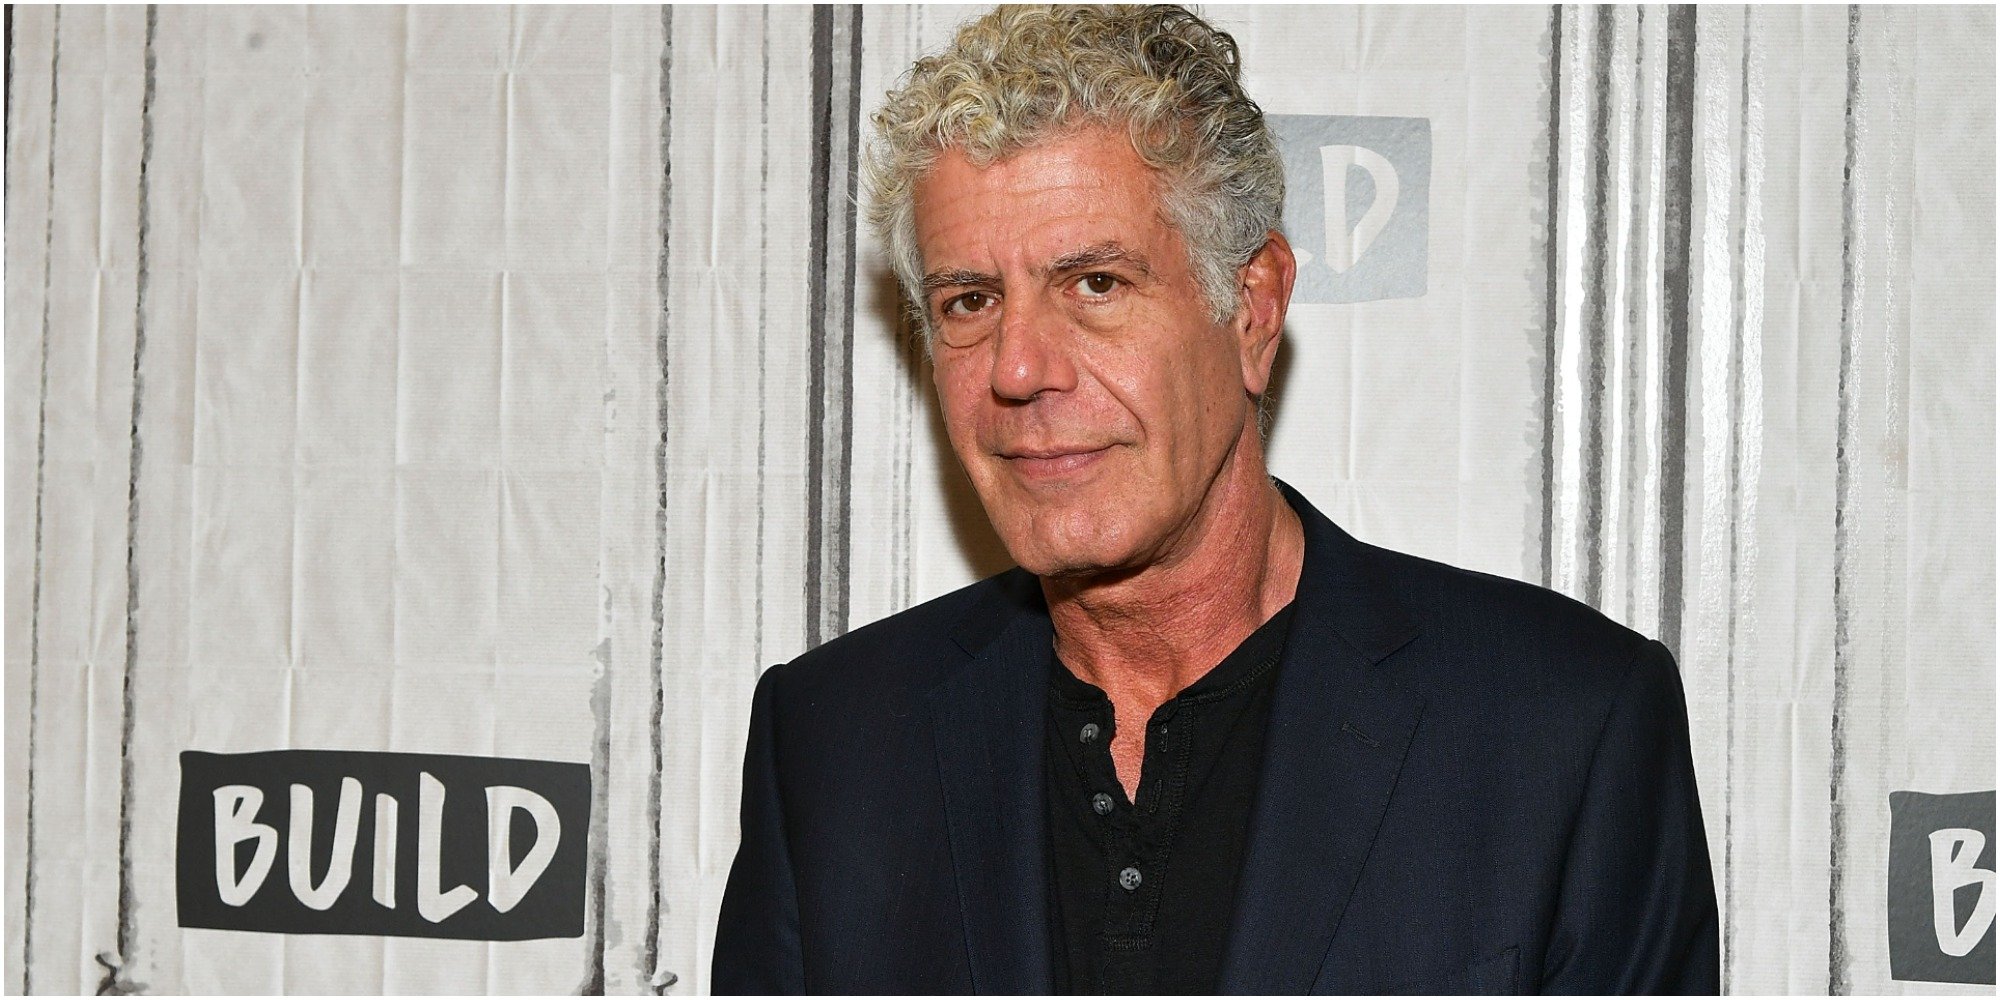 Anthony Bourdain's daughter Ariane wants people to remember her father in this way.